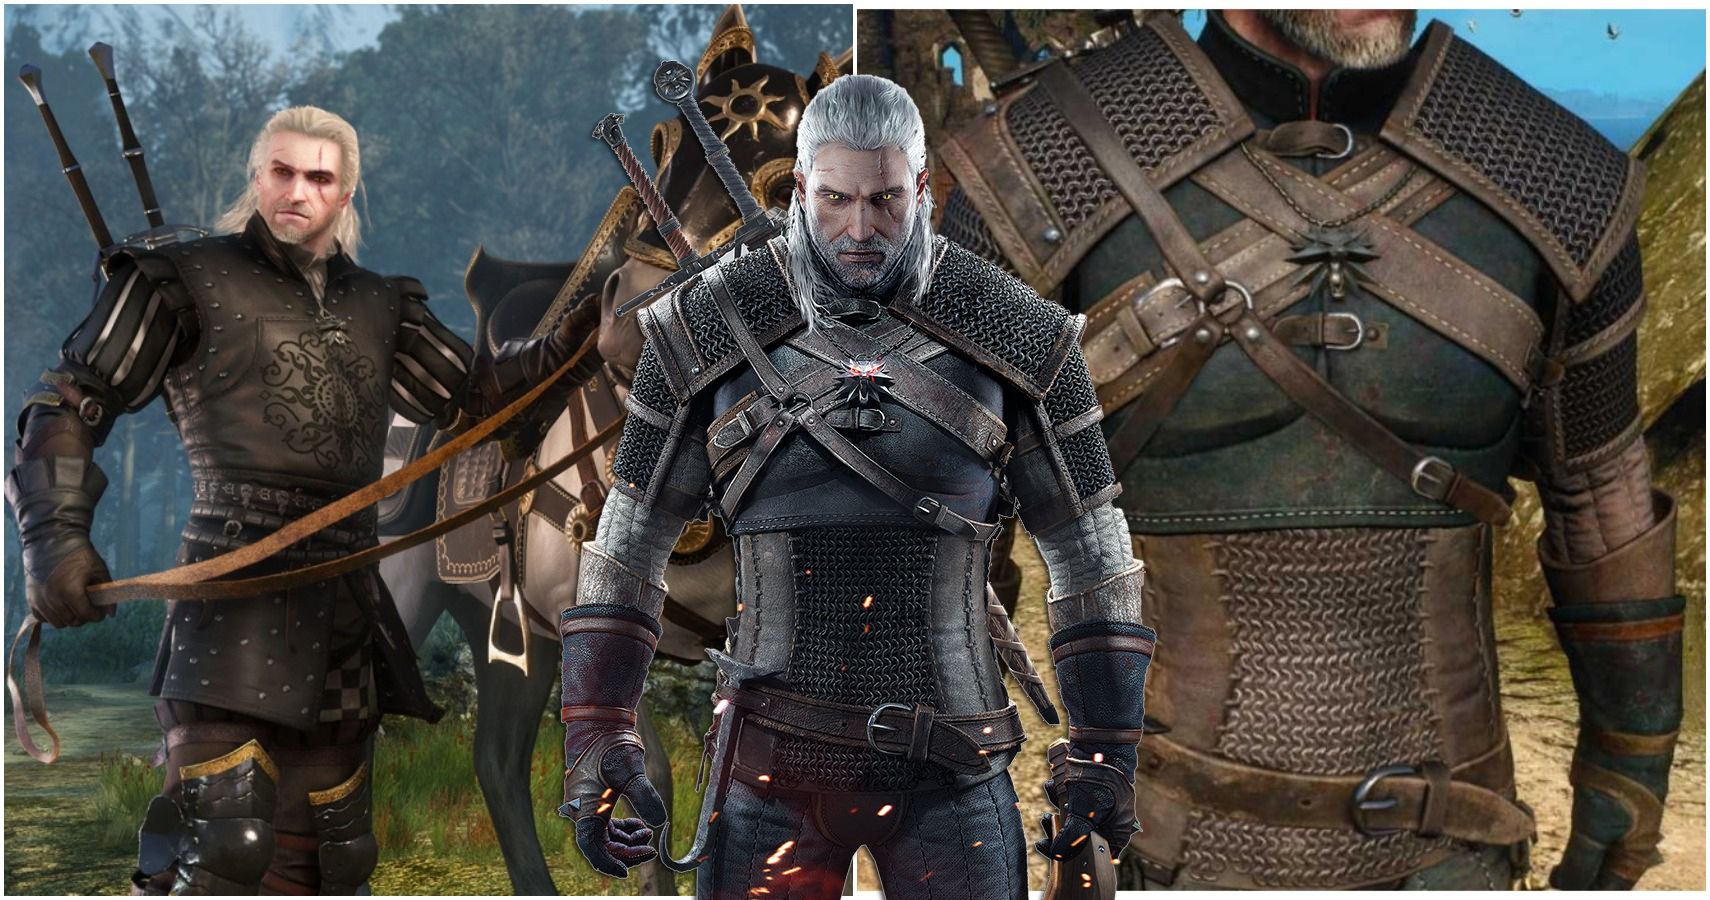 witcher 3 cheat codes pc for gold